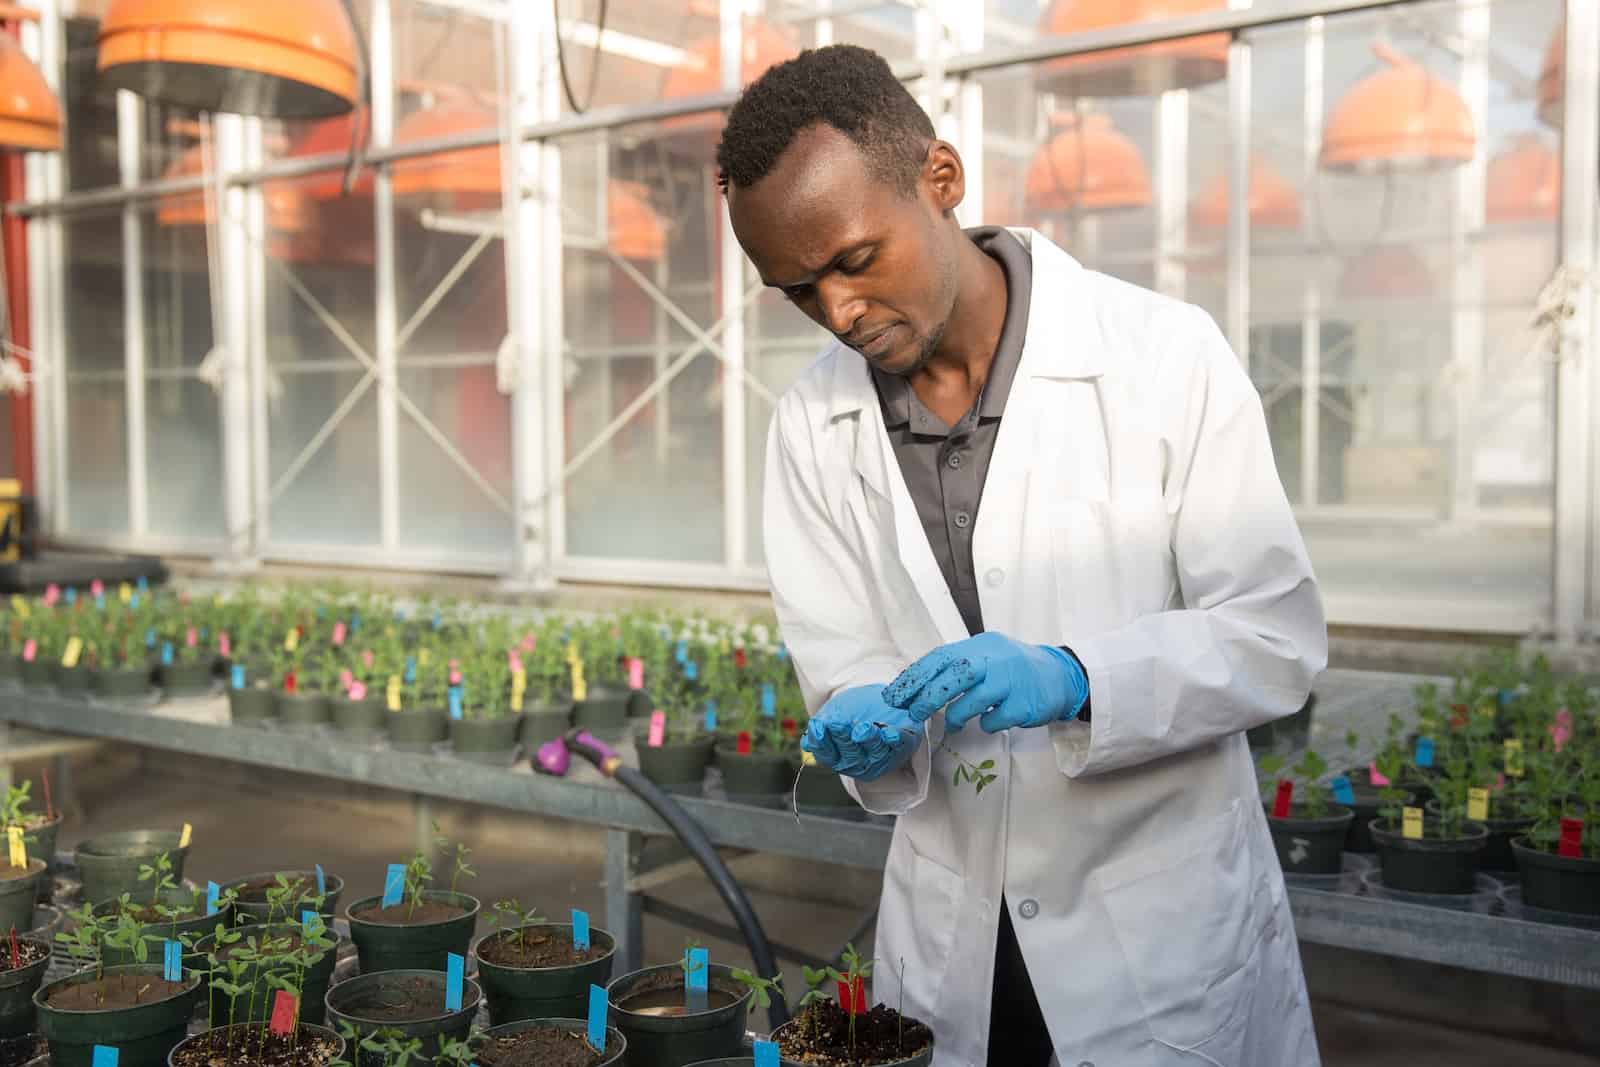 A man in a white lab coat and gloves looks at plants in a greenhouse.